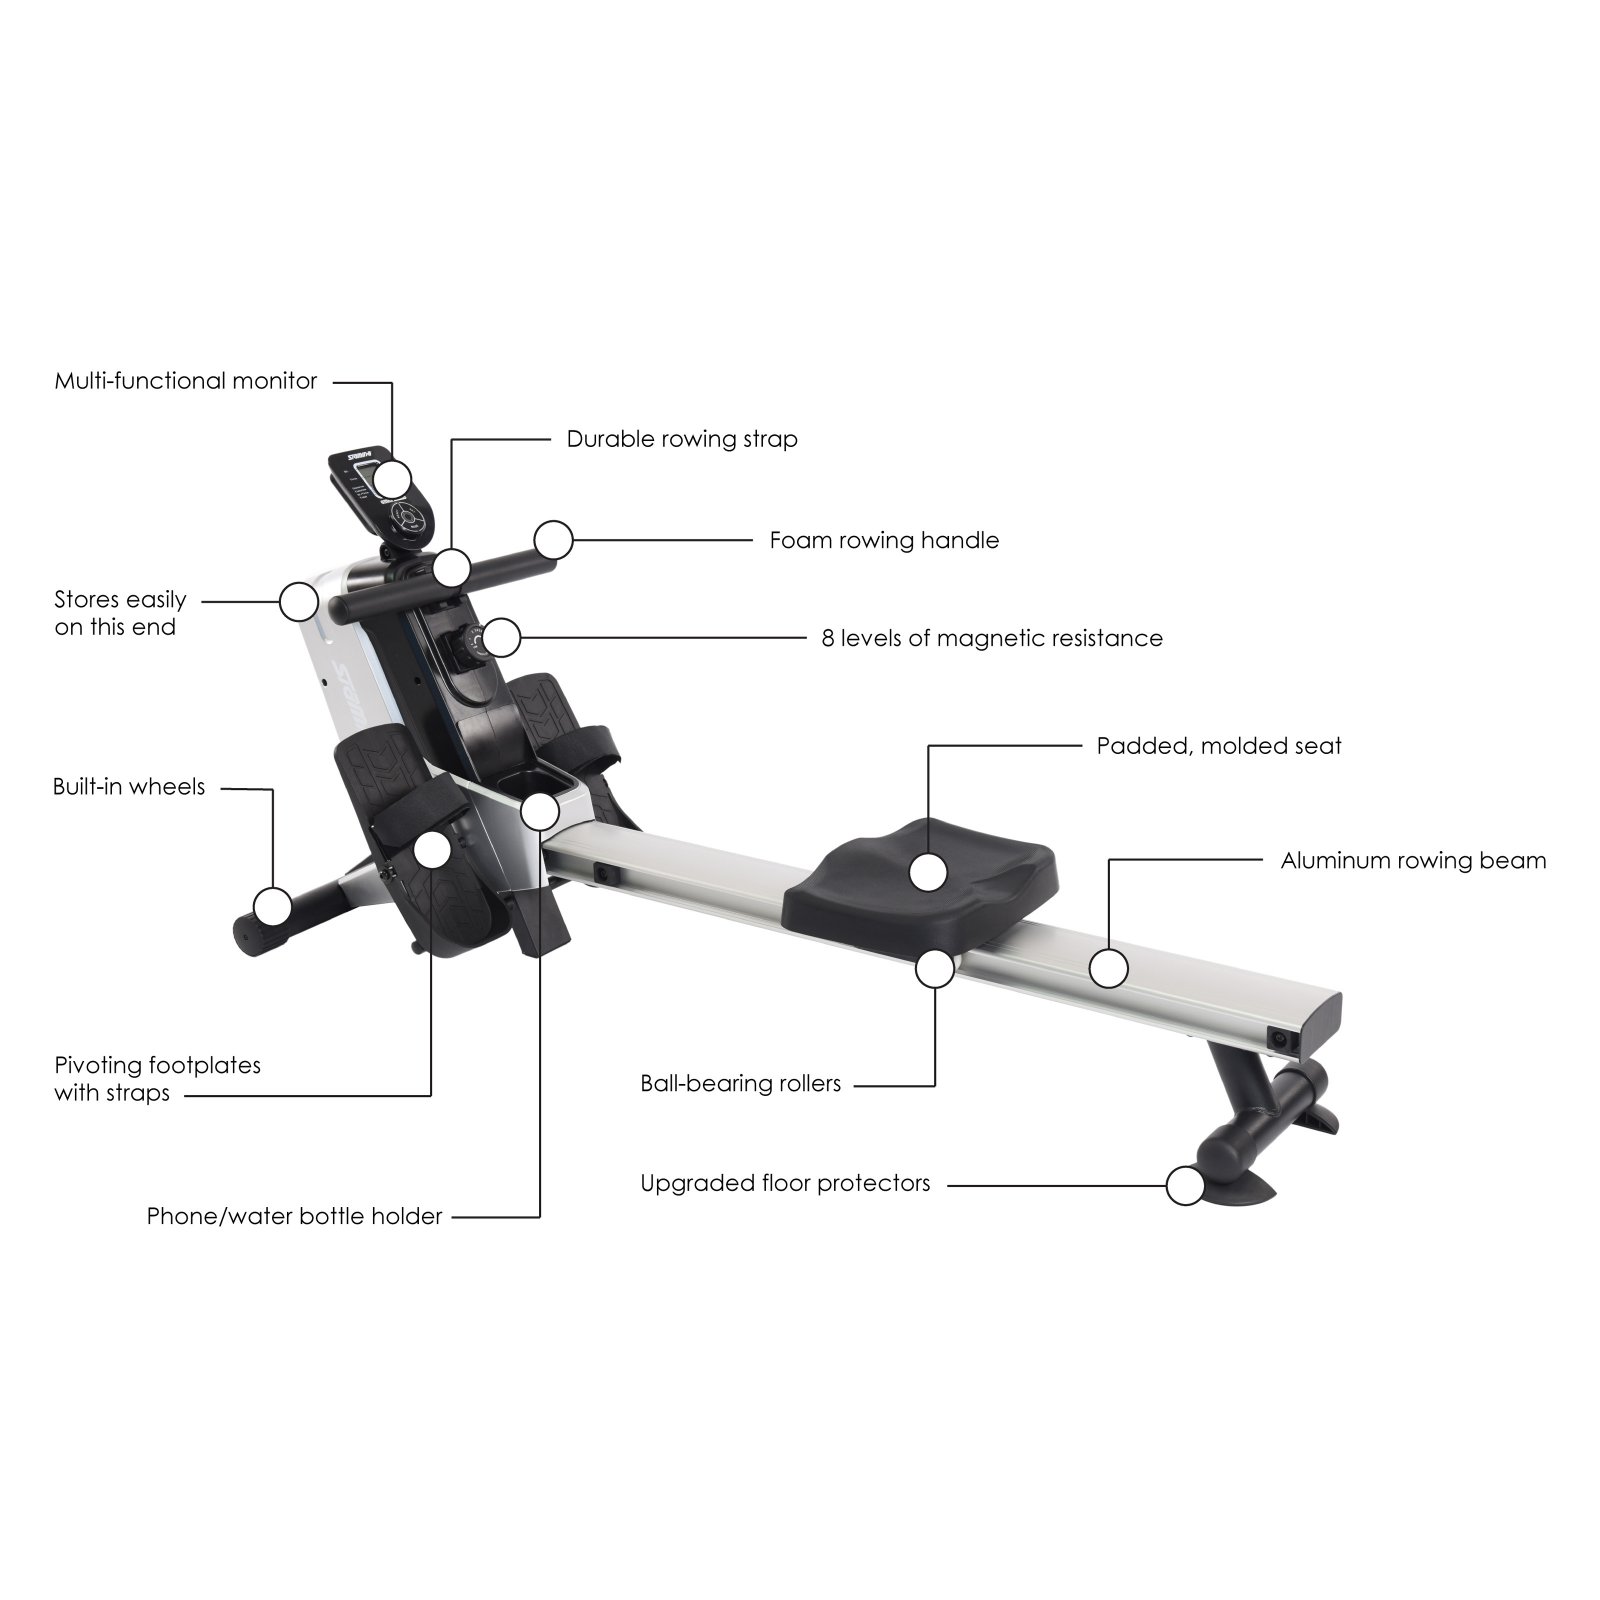 Stamina Products Multi-Level Magnetic Resistance Compact Rowing Machine - image 4 of 11